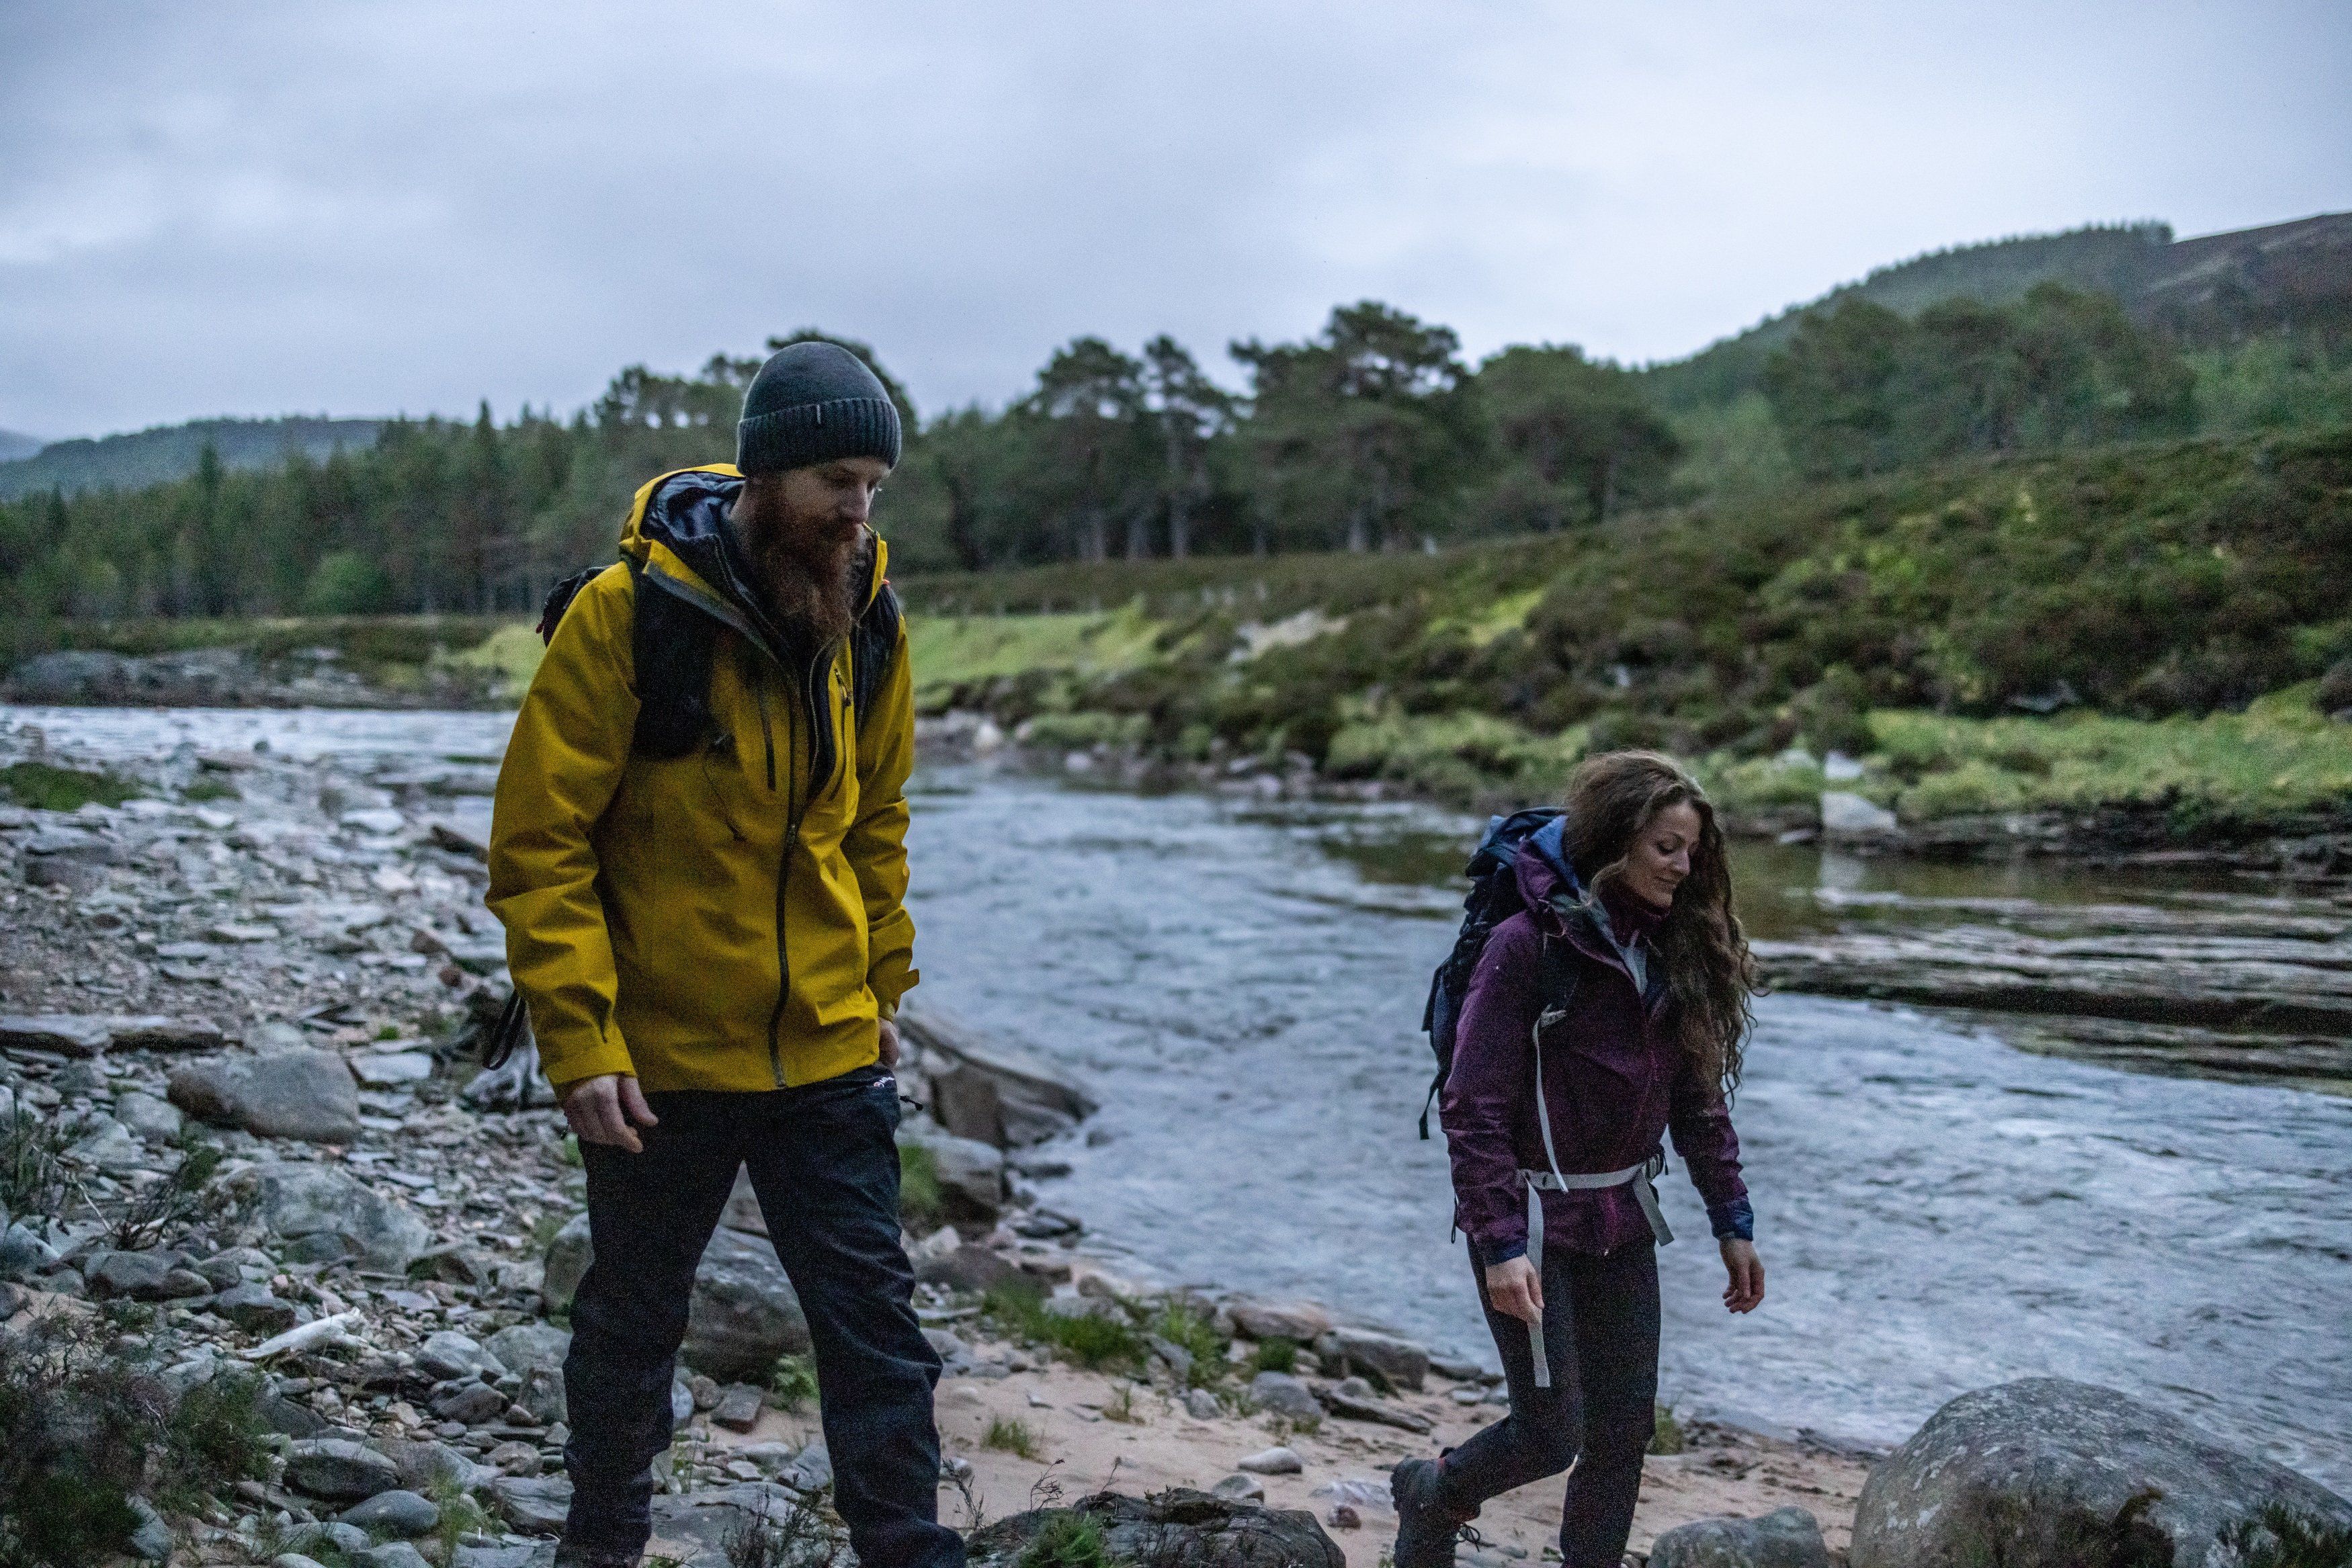 A complete guide on what to wear hiking UK